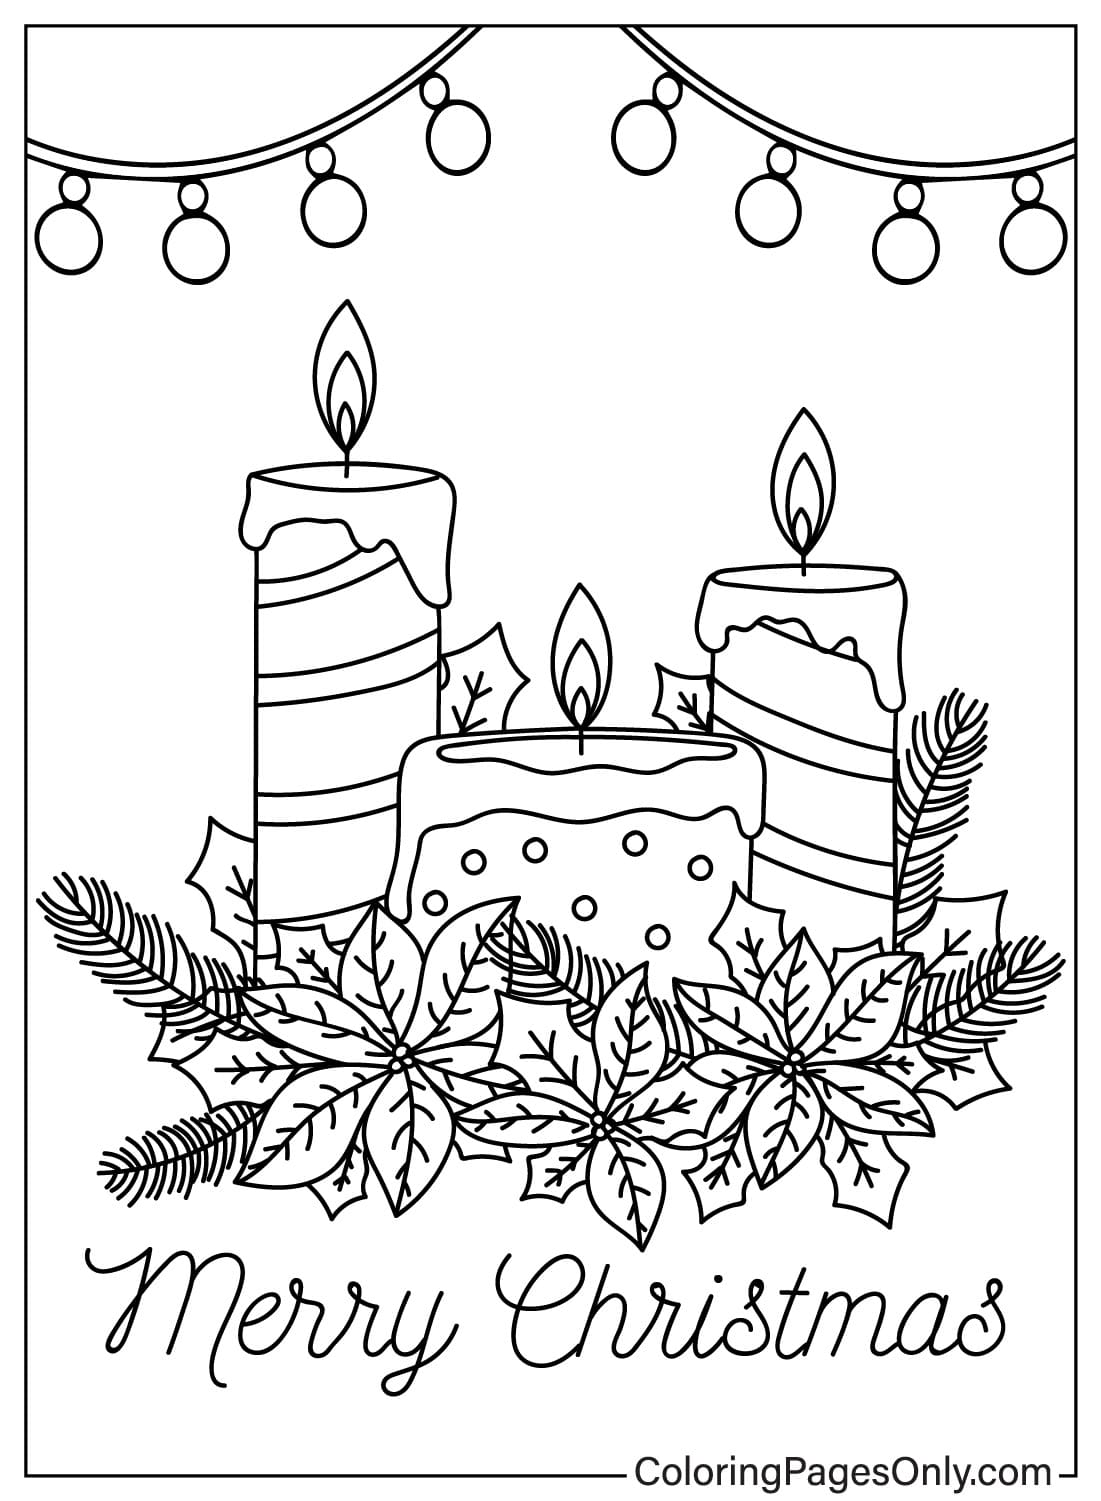 Pictures Christmas Candles Coloring Page - Free Printable Coloring Pages